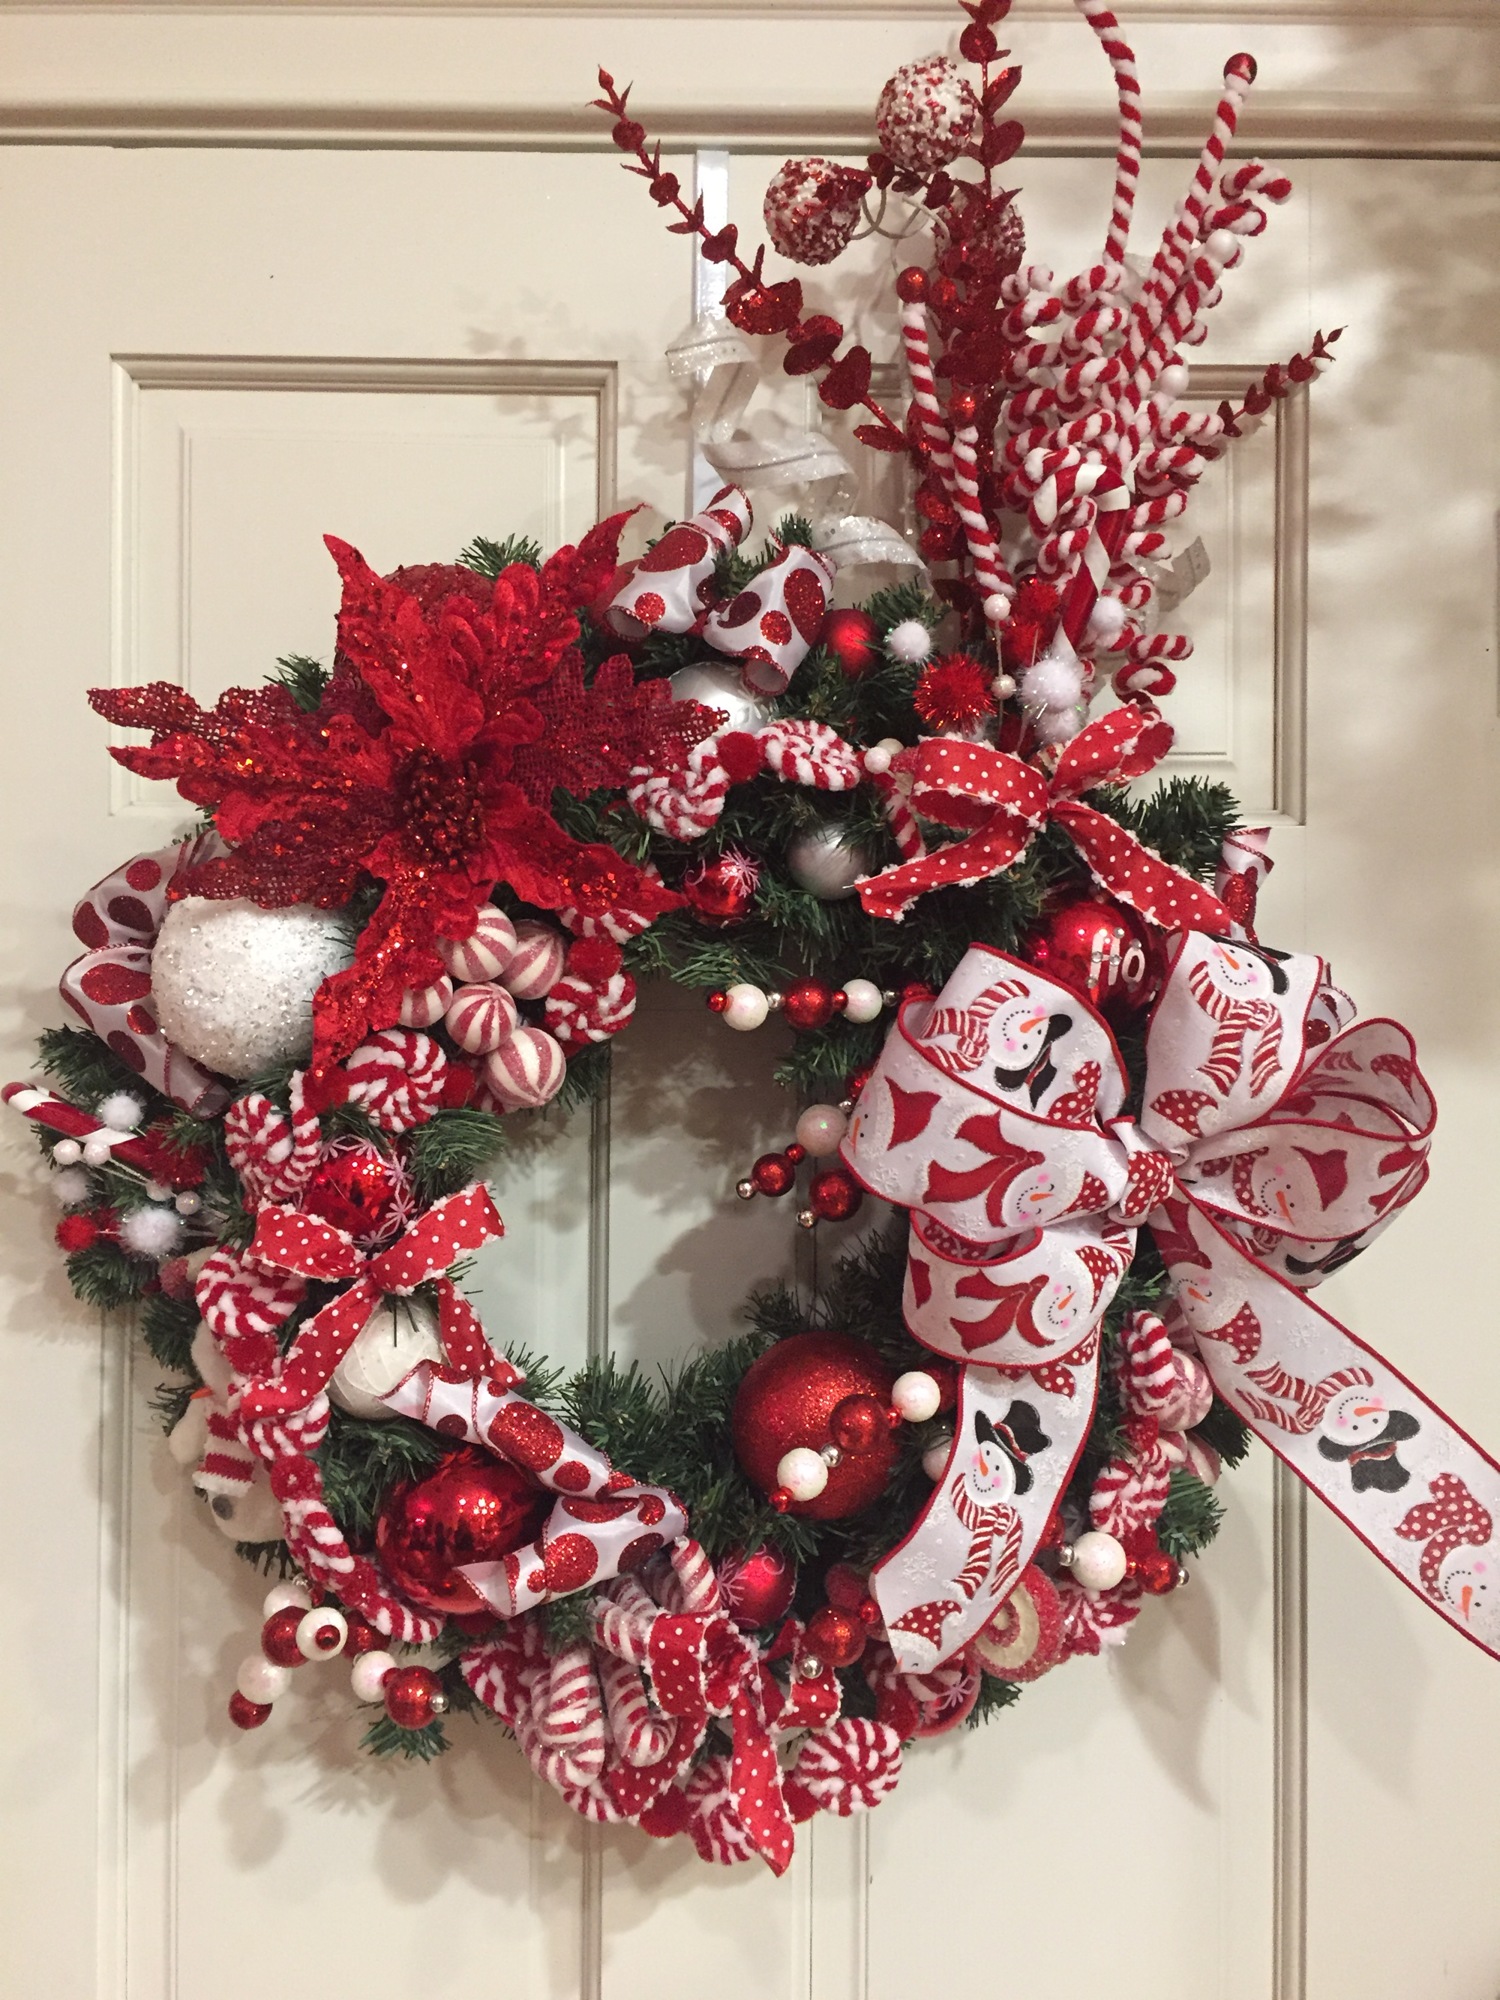 Courtesy. Penny Parks creates wreaths for Christmas and other holidays.